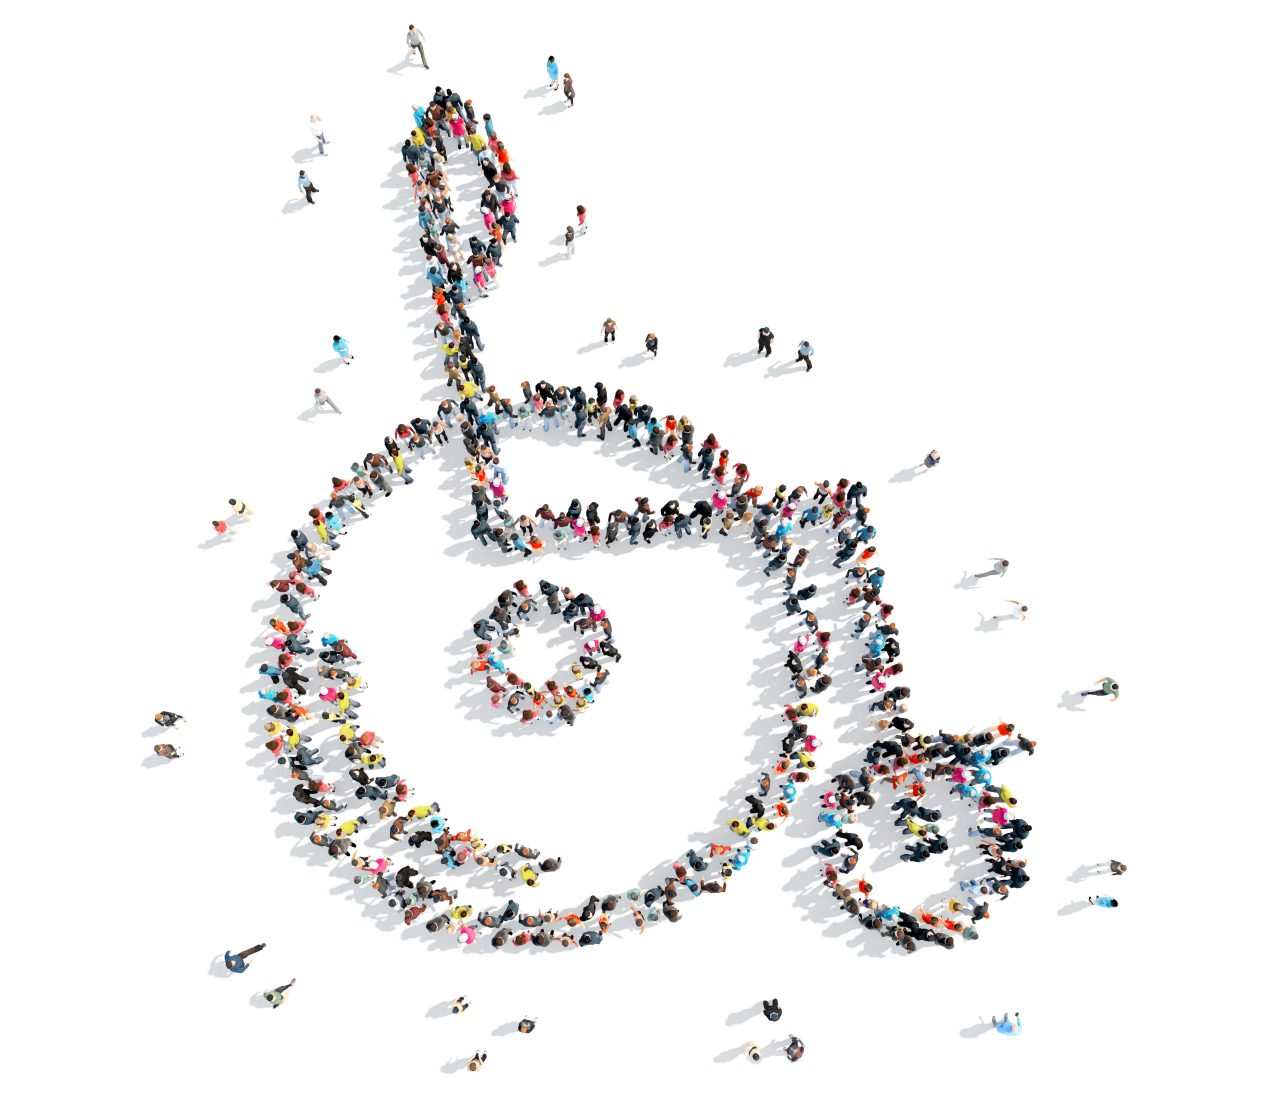 Group of people from above in the shape of a wheelchair user